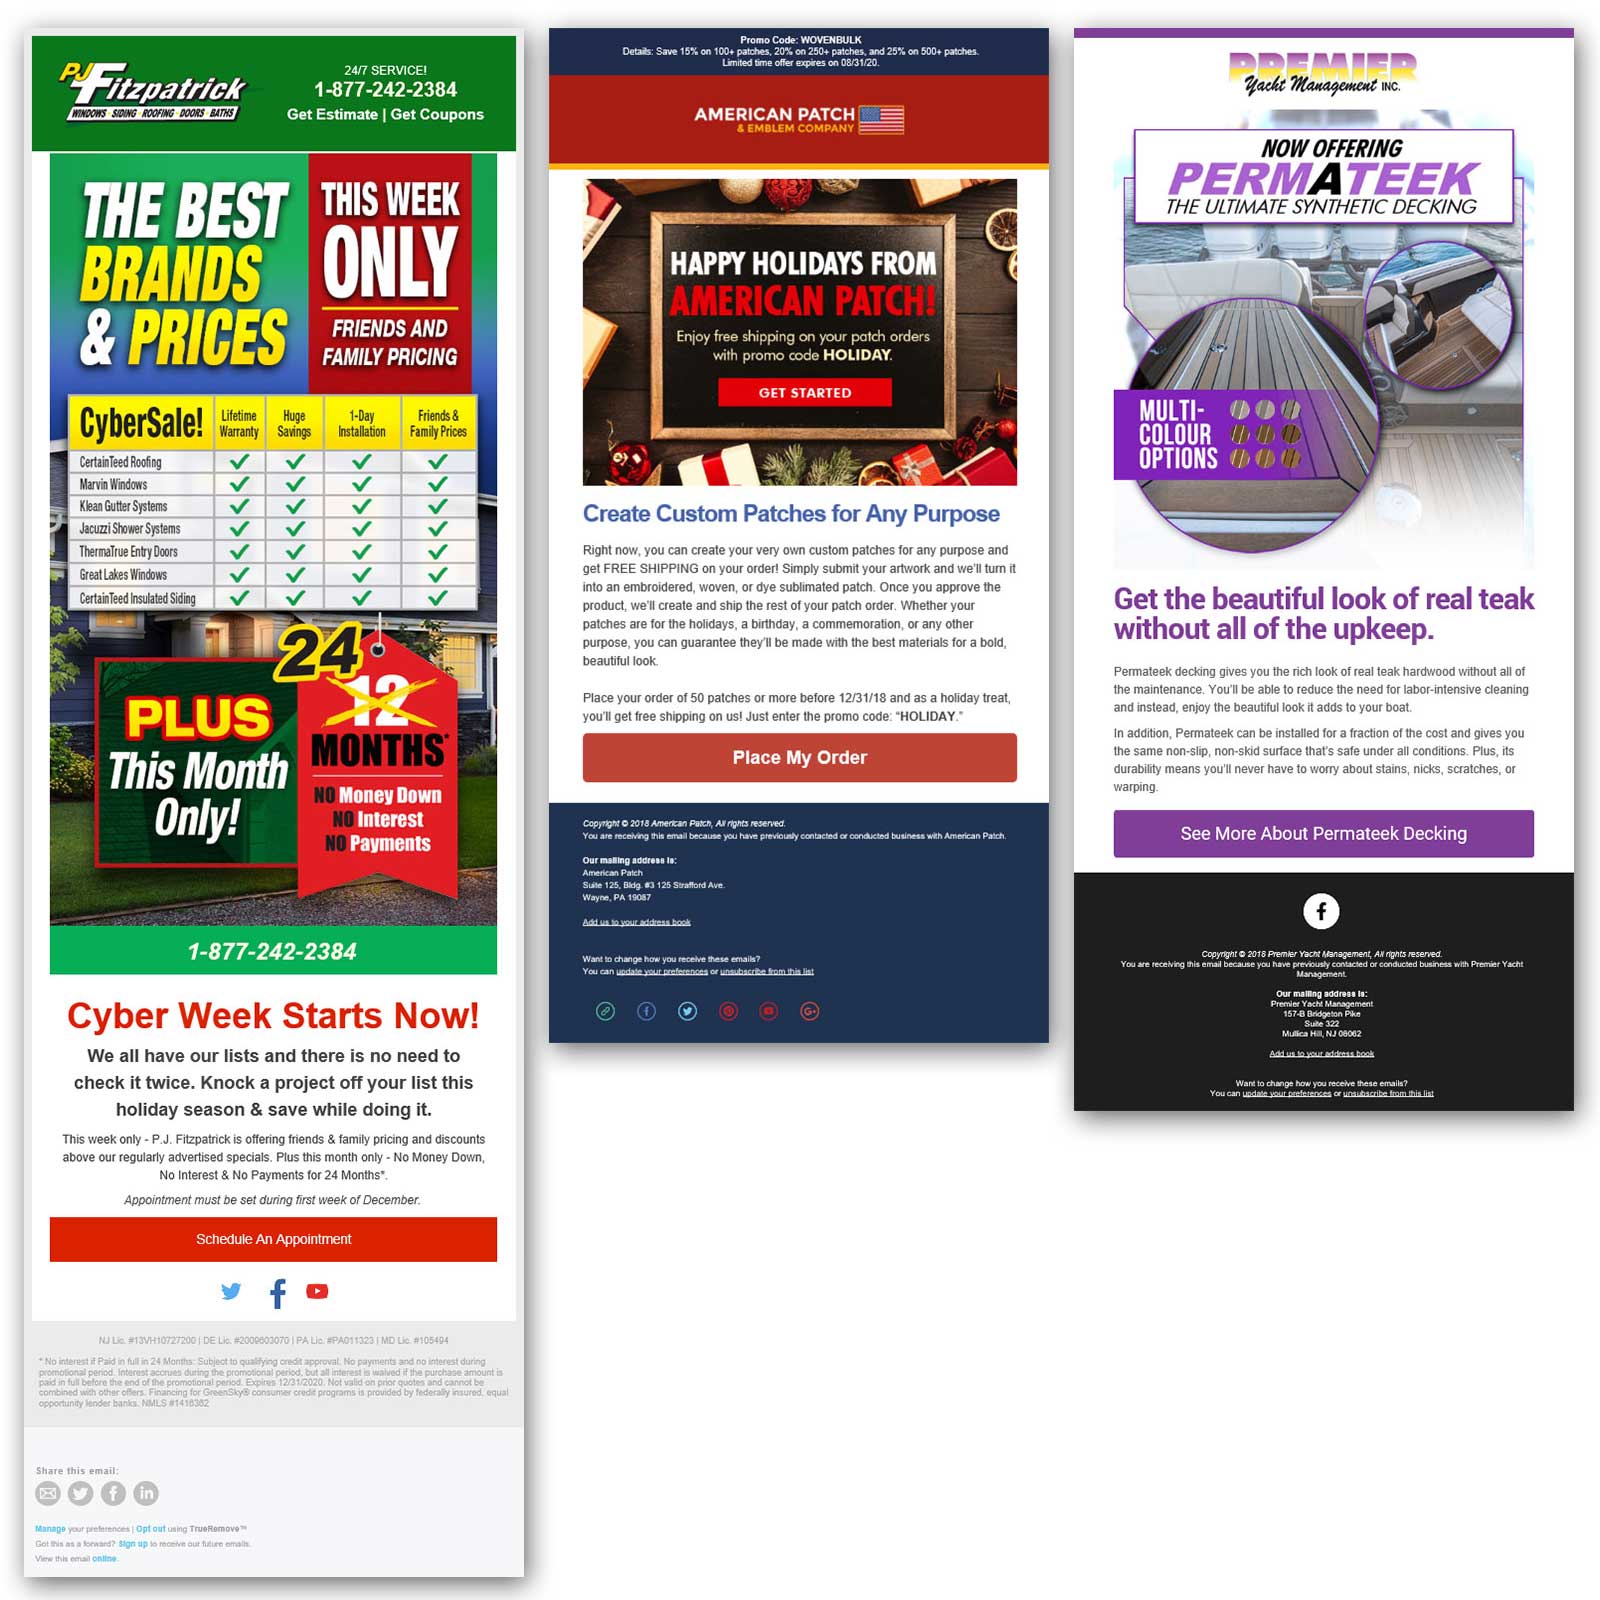 Successful Email Marketing Campaigns